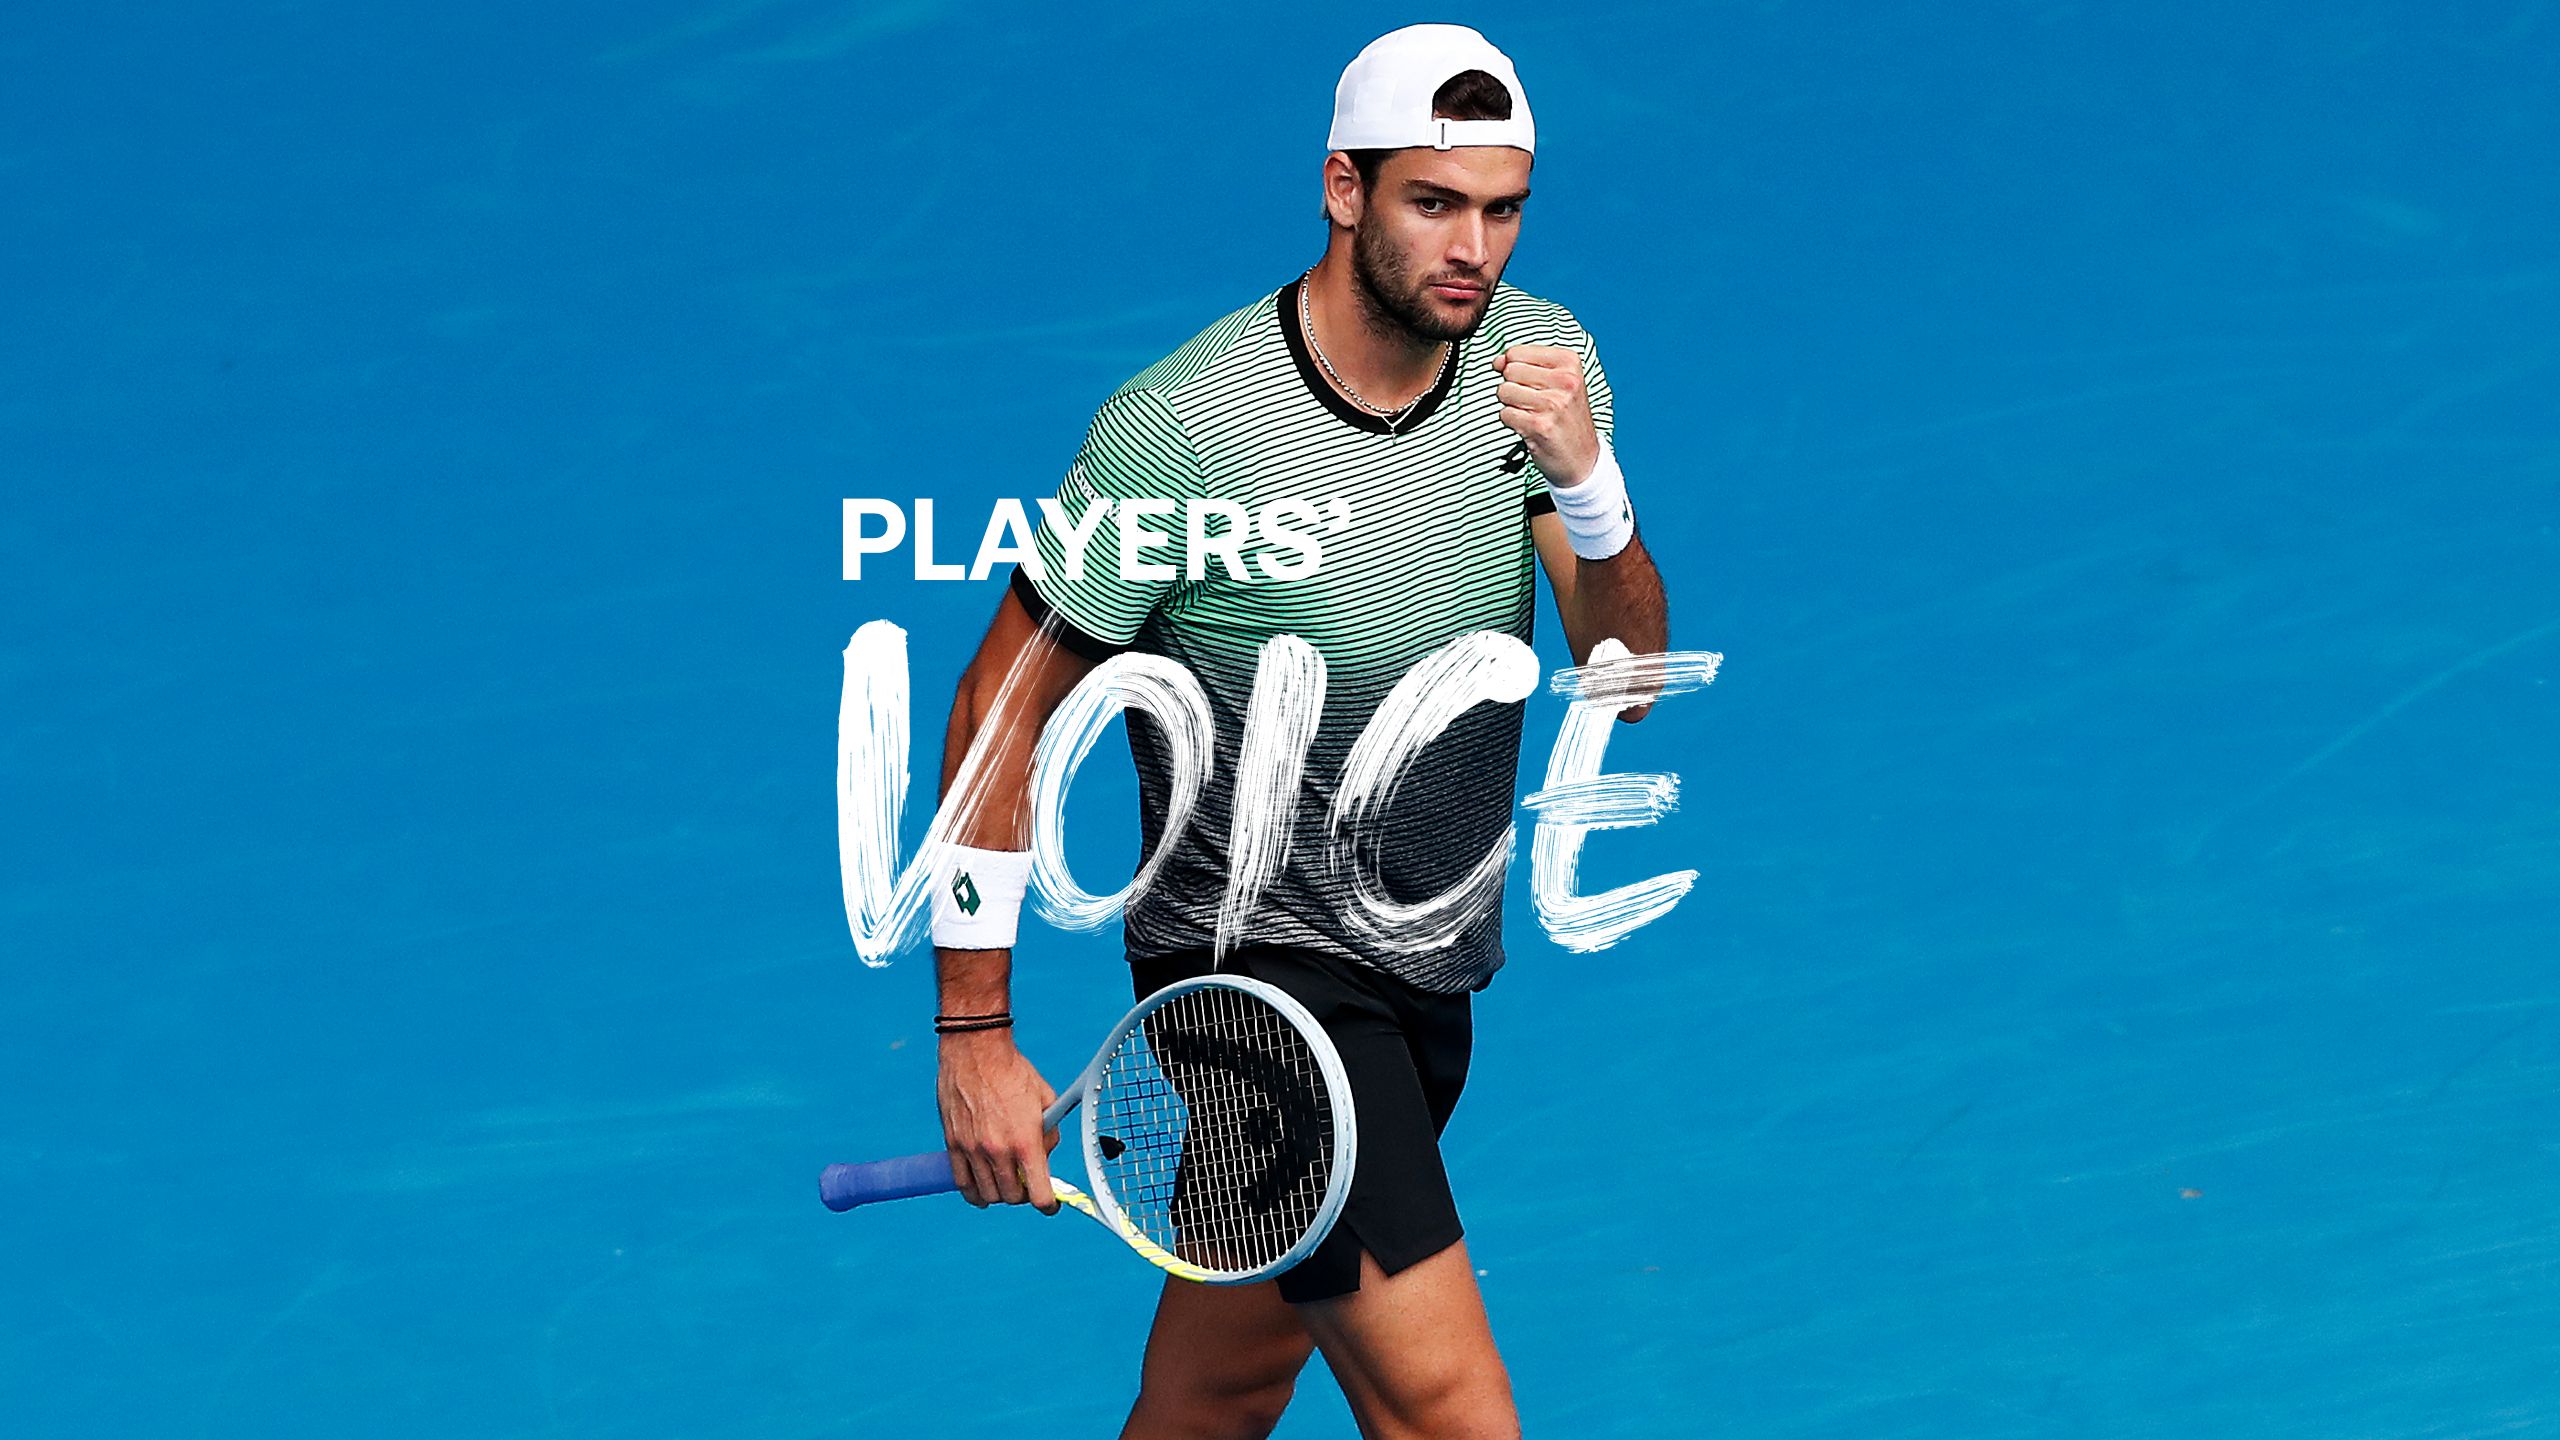 Tennis - Matteo Berrettini The higher you go, the more complicated things get